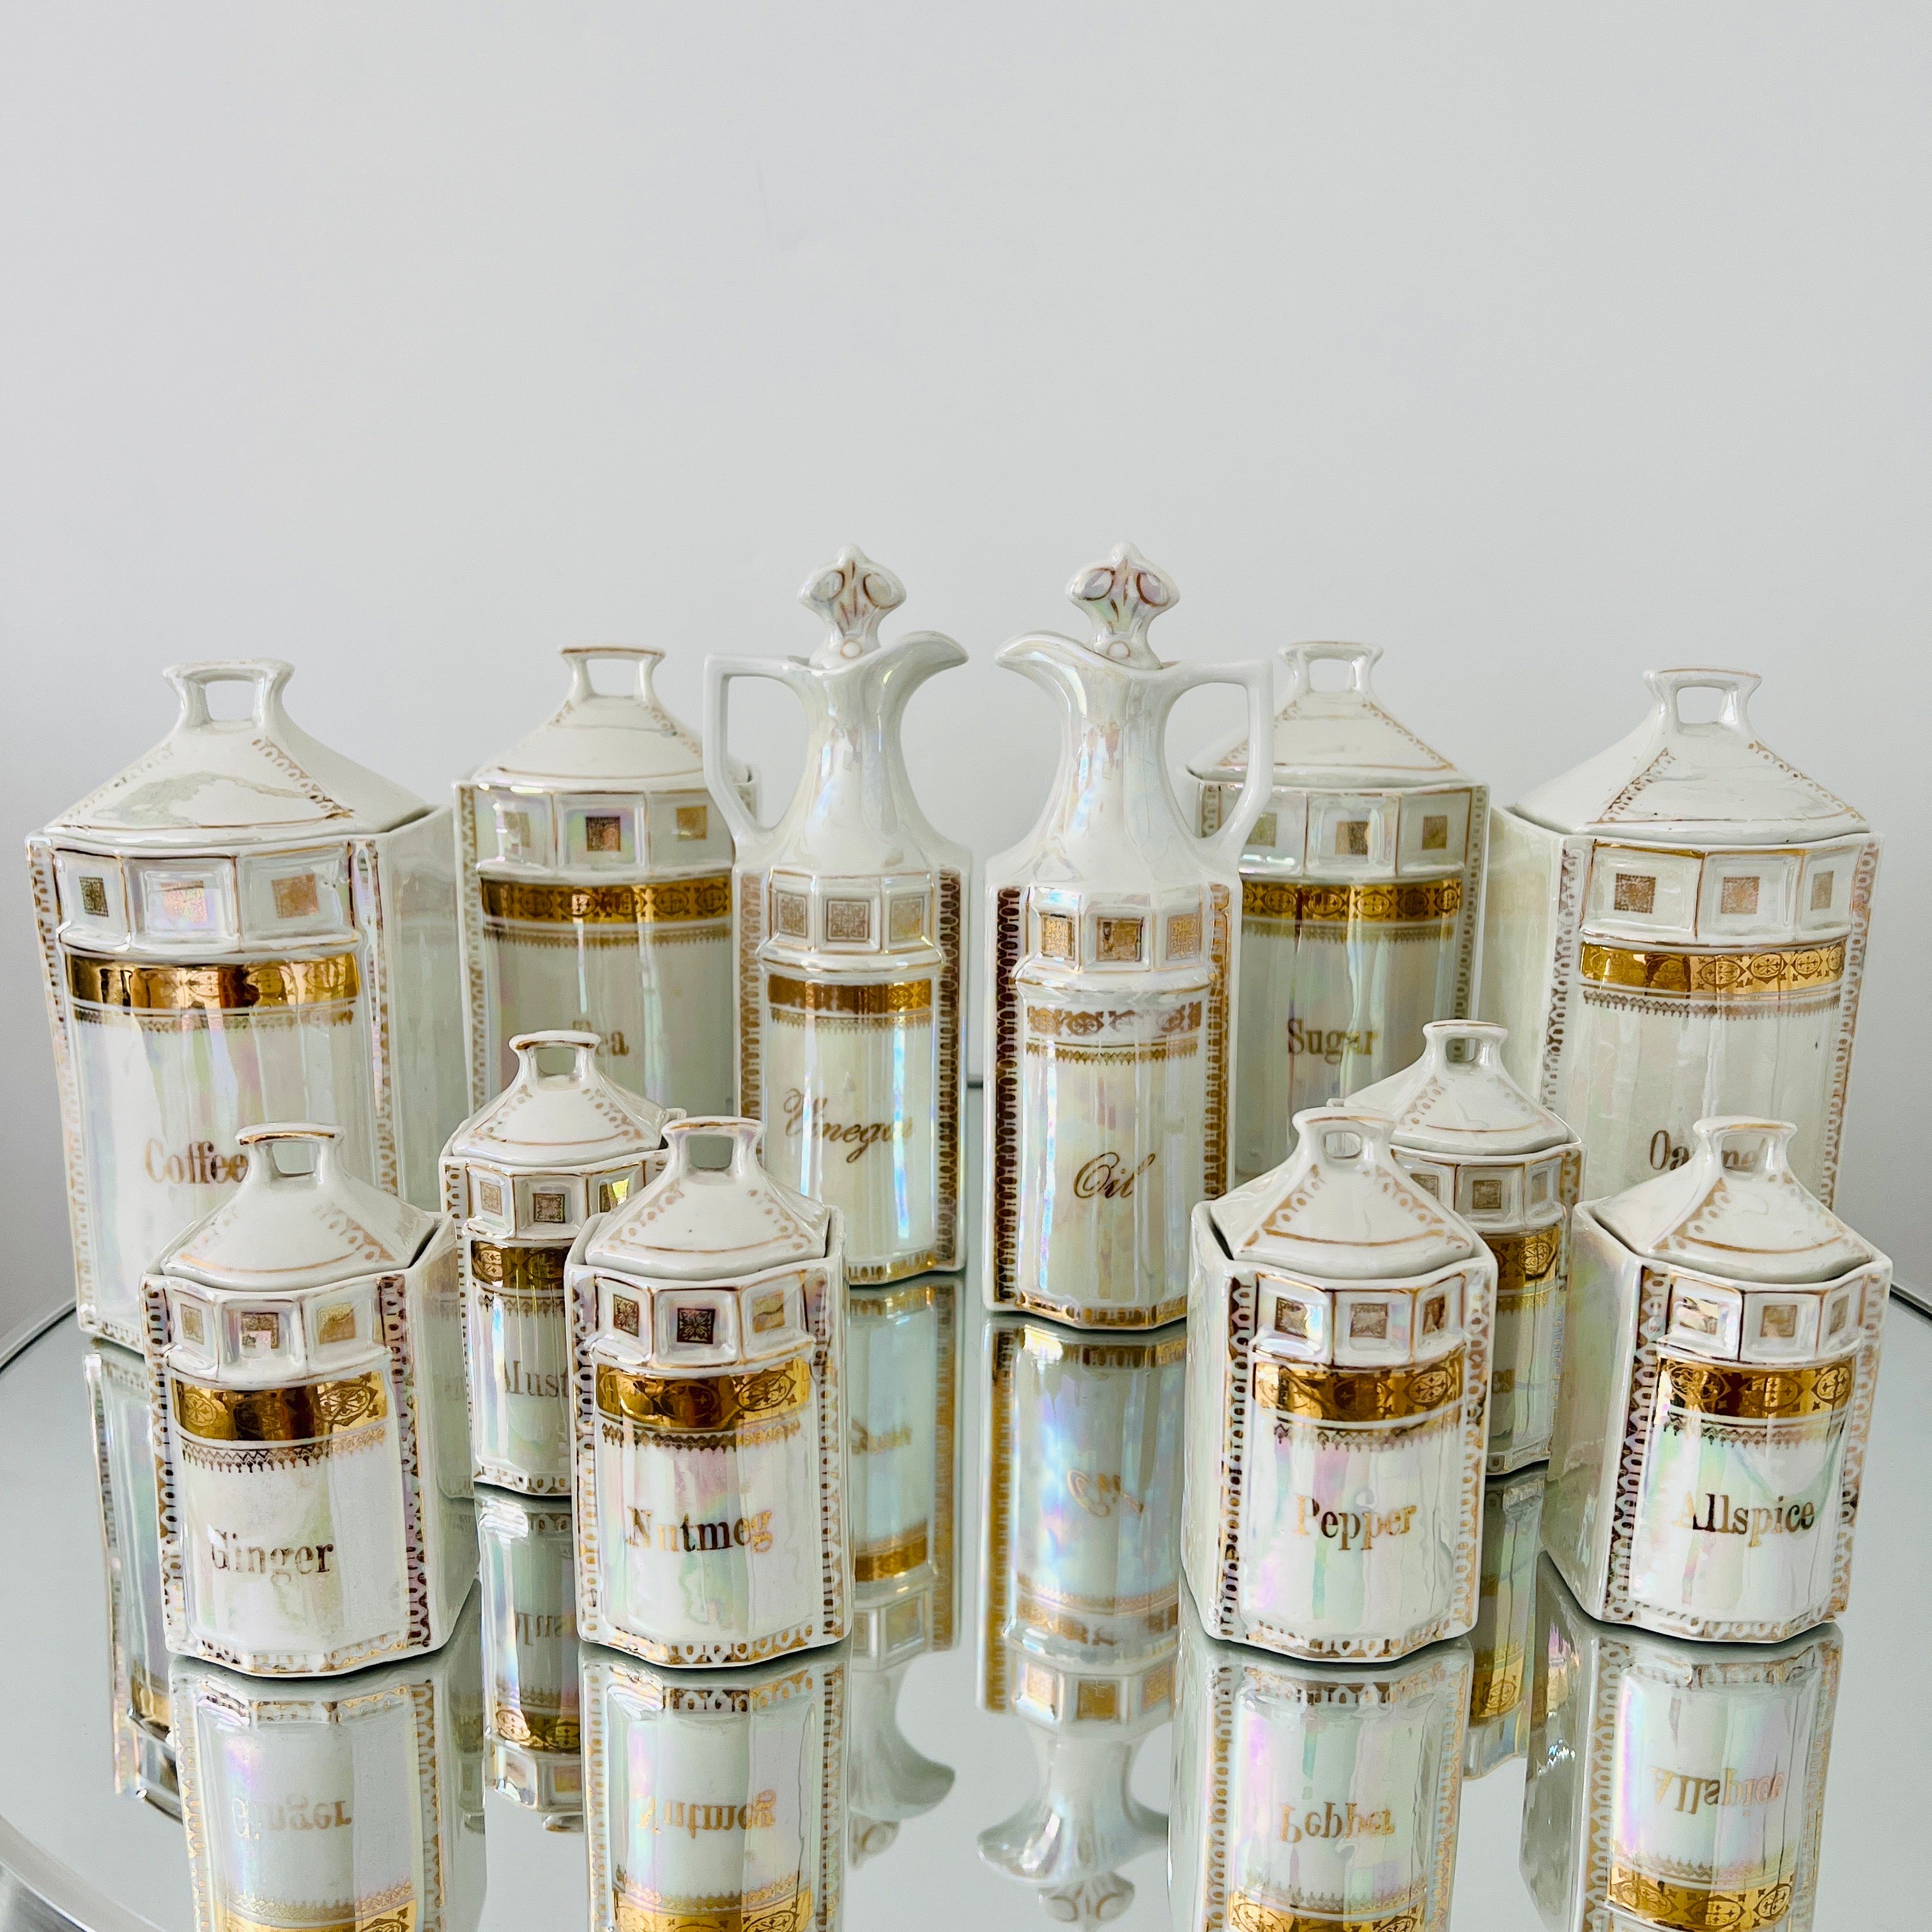 Handmade antique porcelain apothecary and spice canister set with 13 pieces. Hand-painted in 24K gold leaf with iridescent metallic glaze or lusterware. The set includes four large canisters with lids (measuring 8.5 H x 4.5 D), six spice jars with